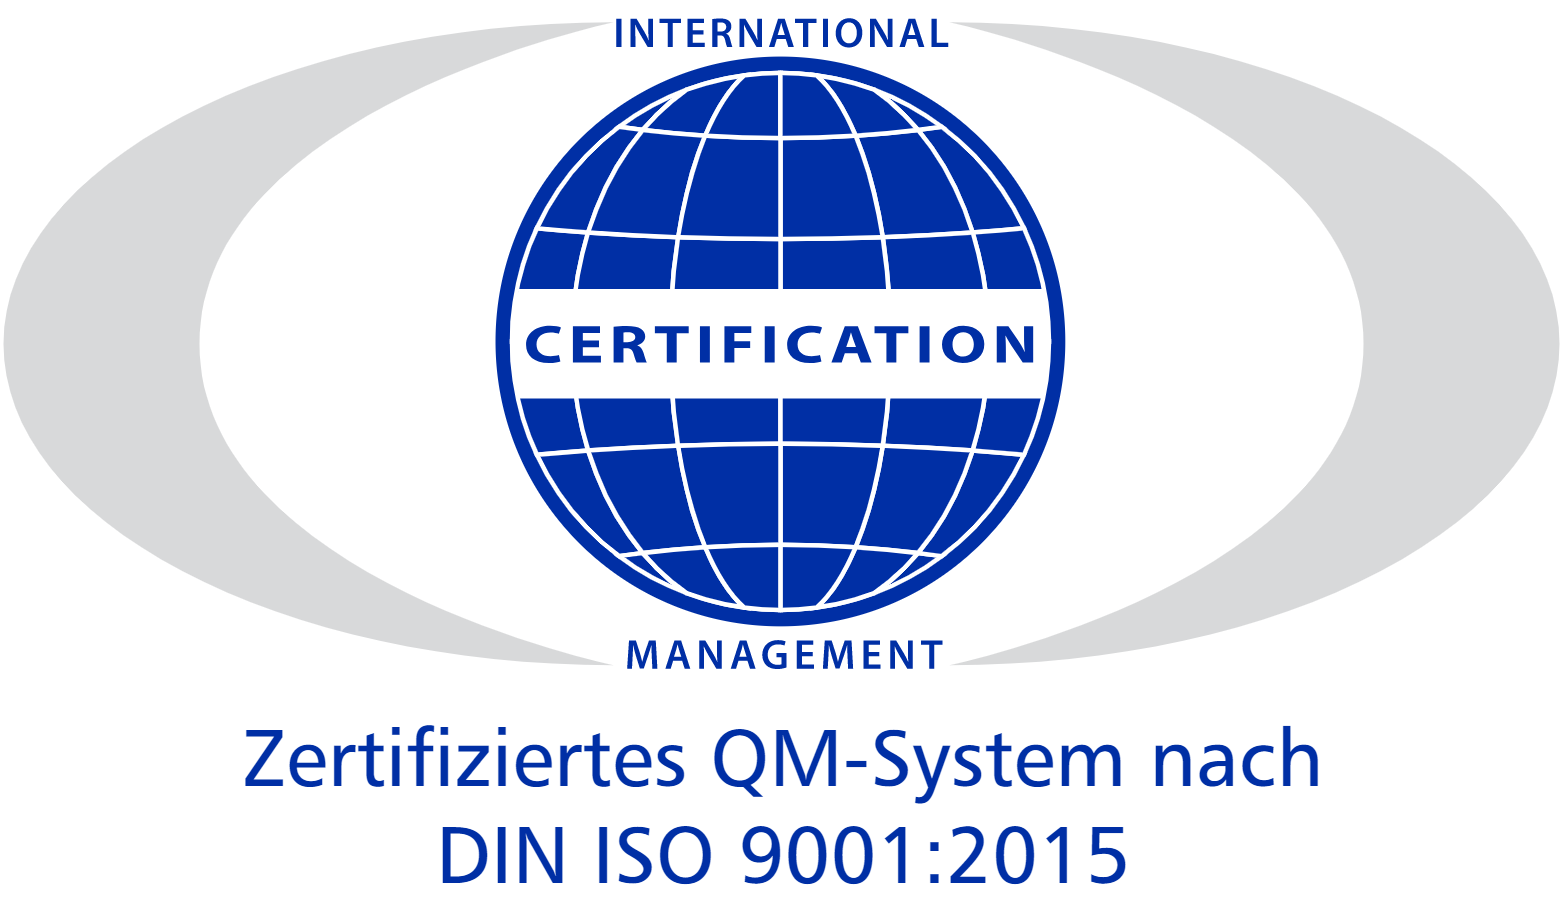 DIN ISO 9001 Zertifikation